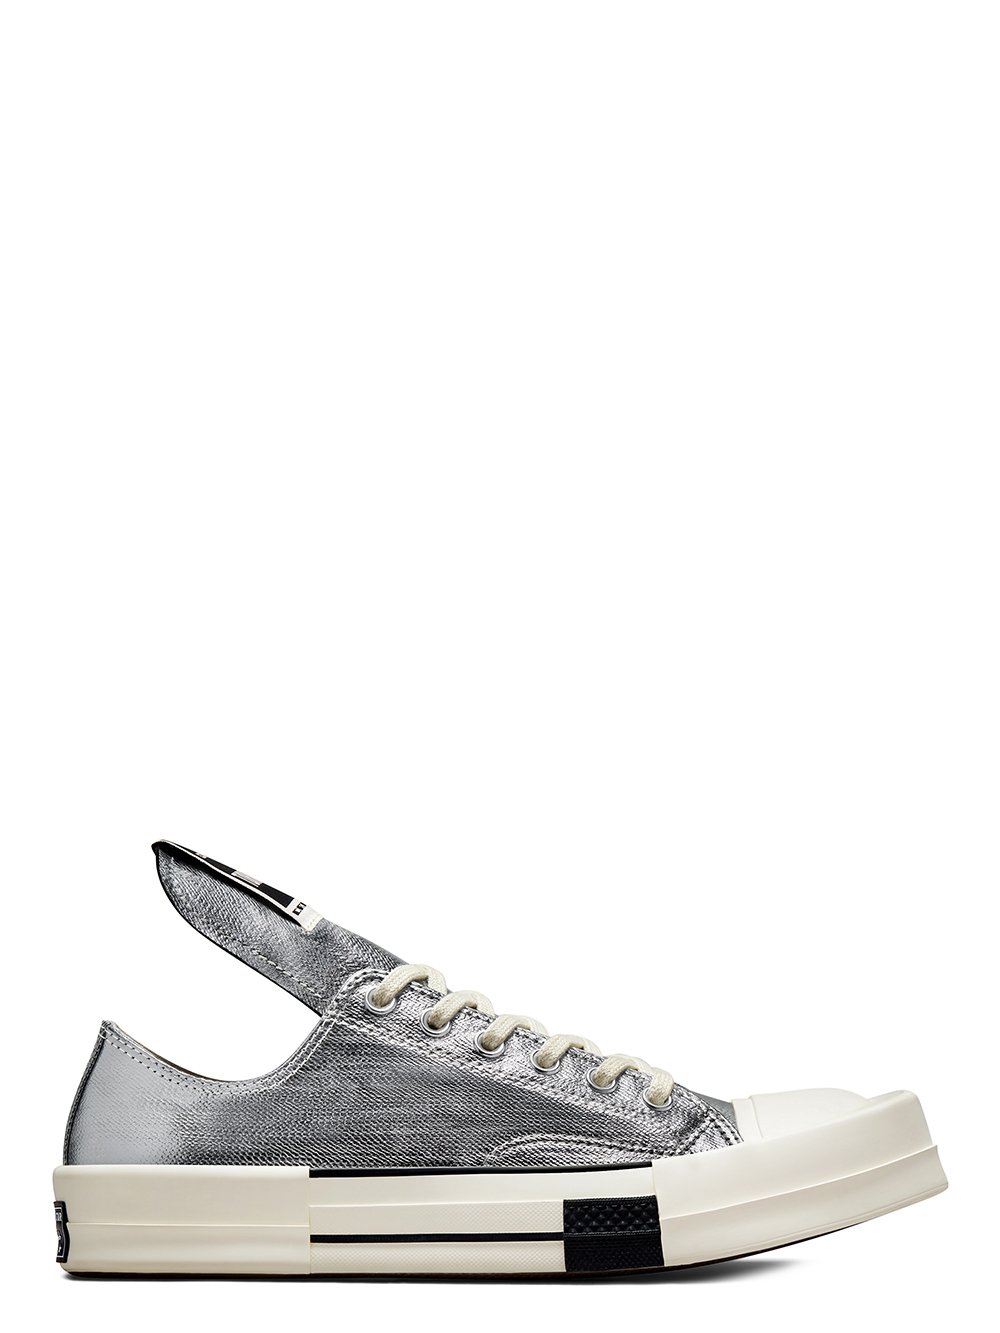 CONVERSE X DRKSHDW TURBODRK IN SILVER AND WHITE